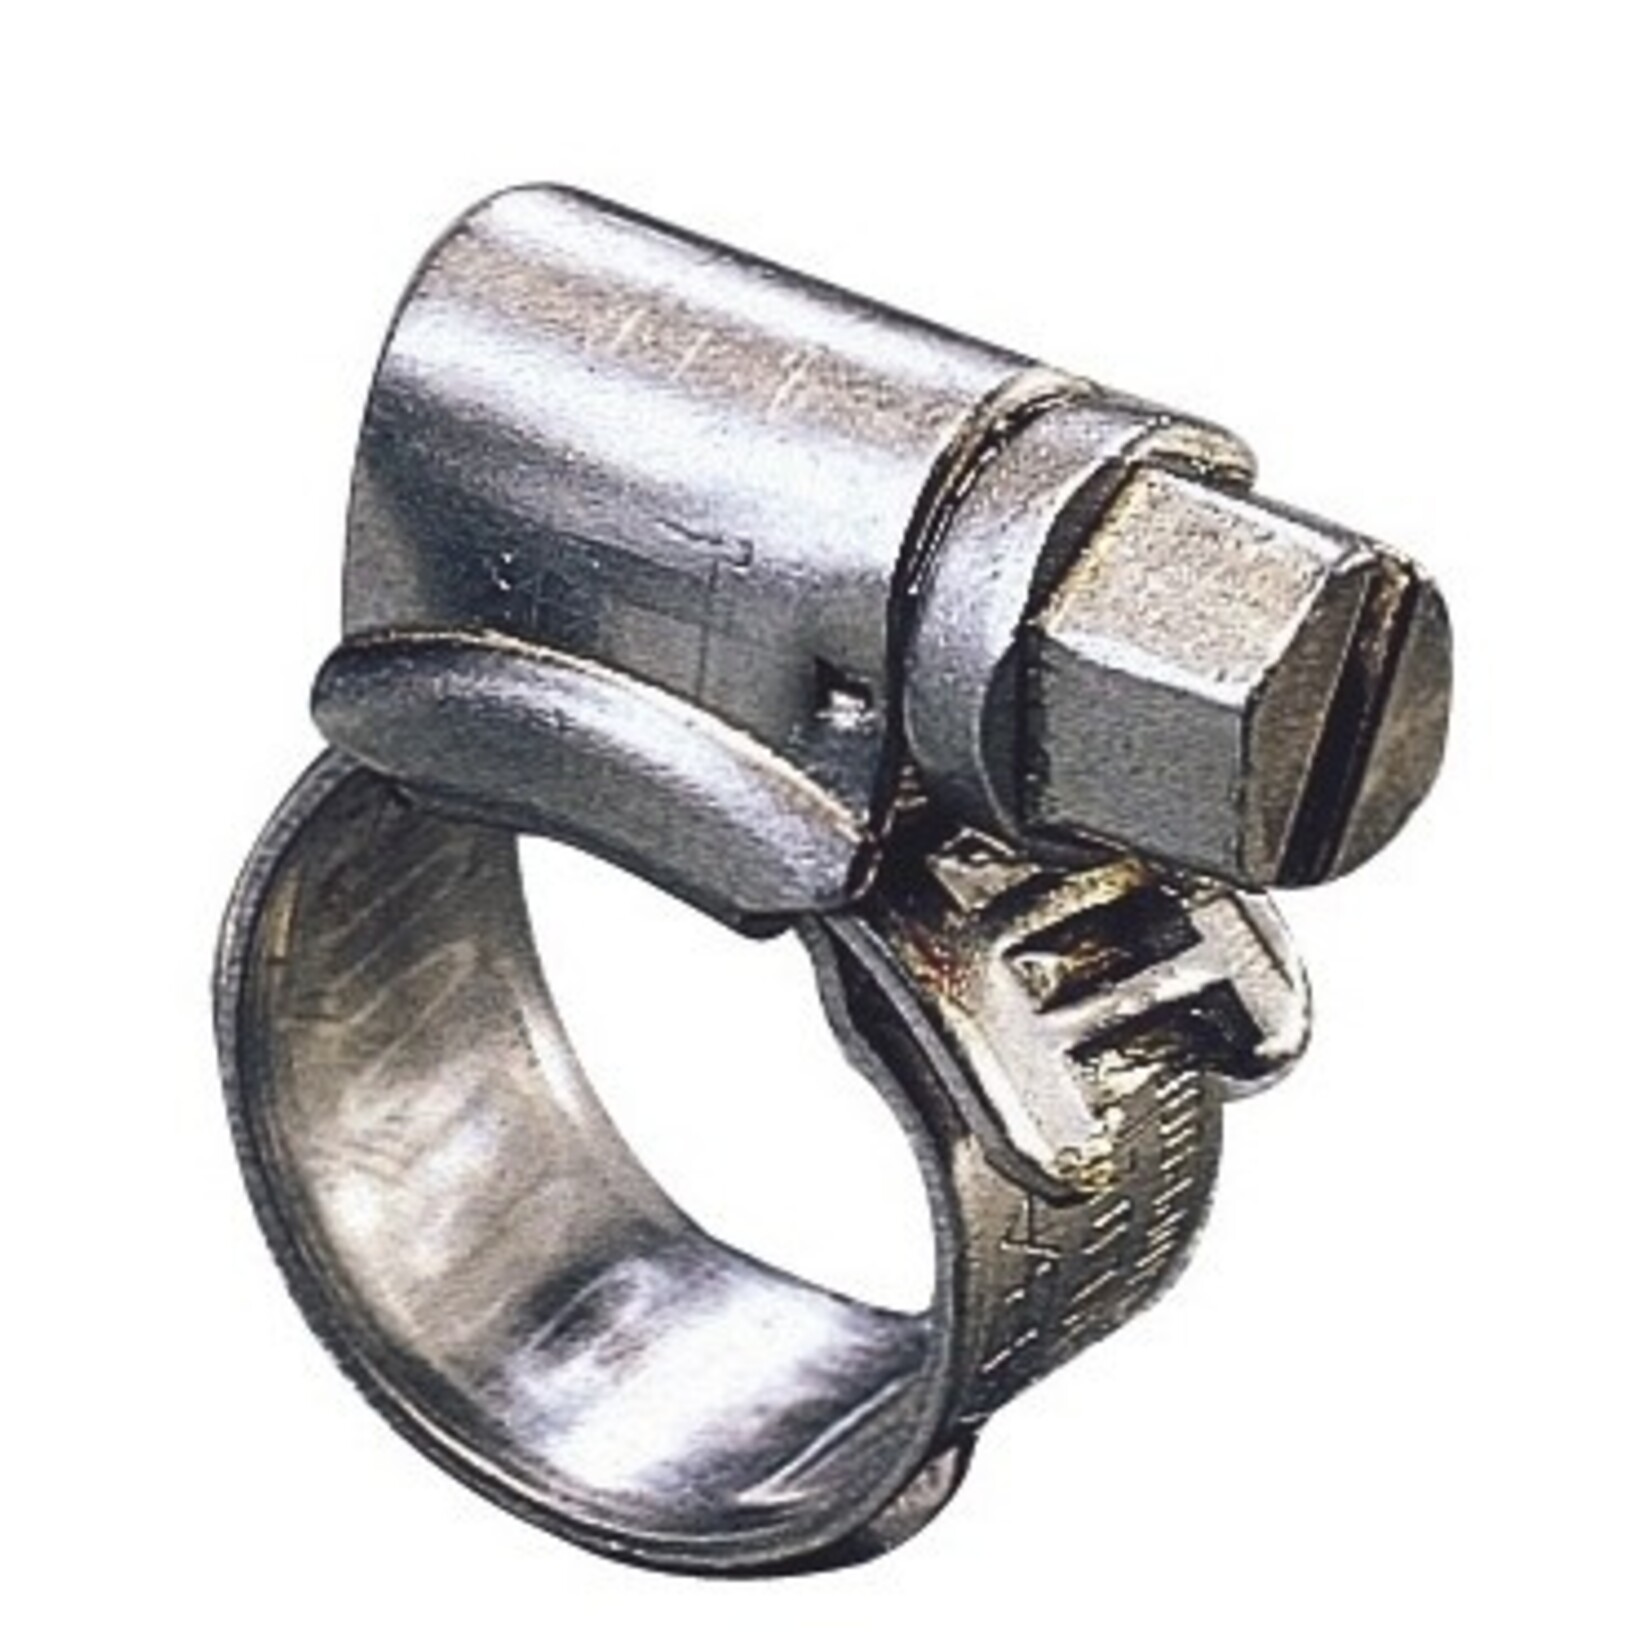 Plastimo Clamp st-steel a2 9mm dia 11.17mm